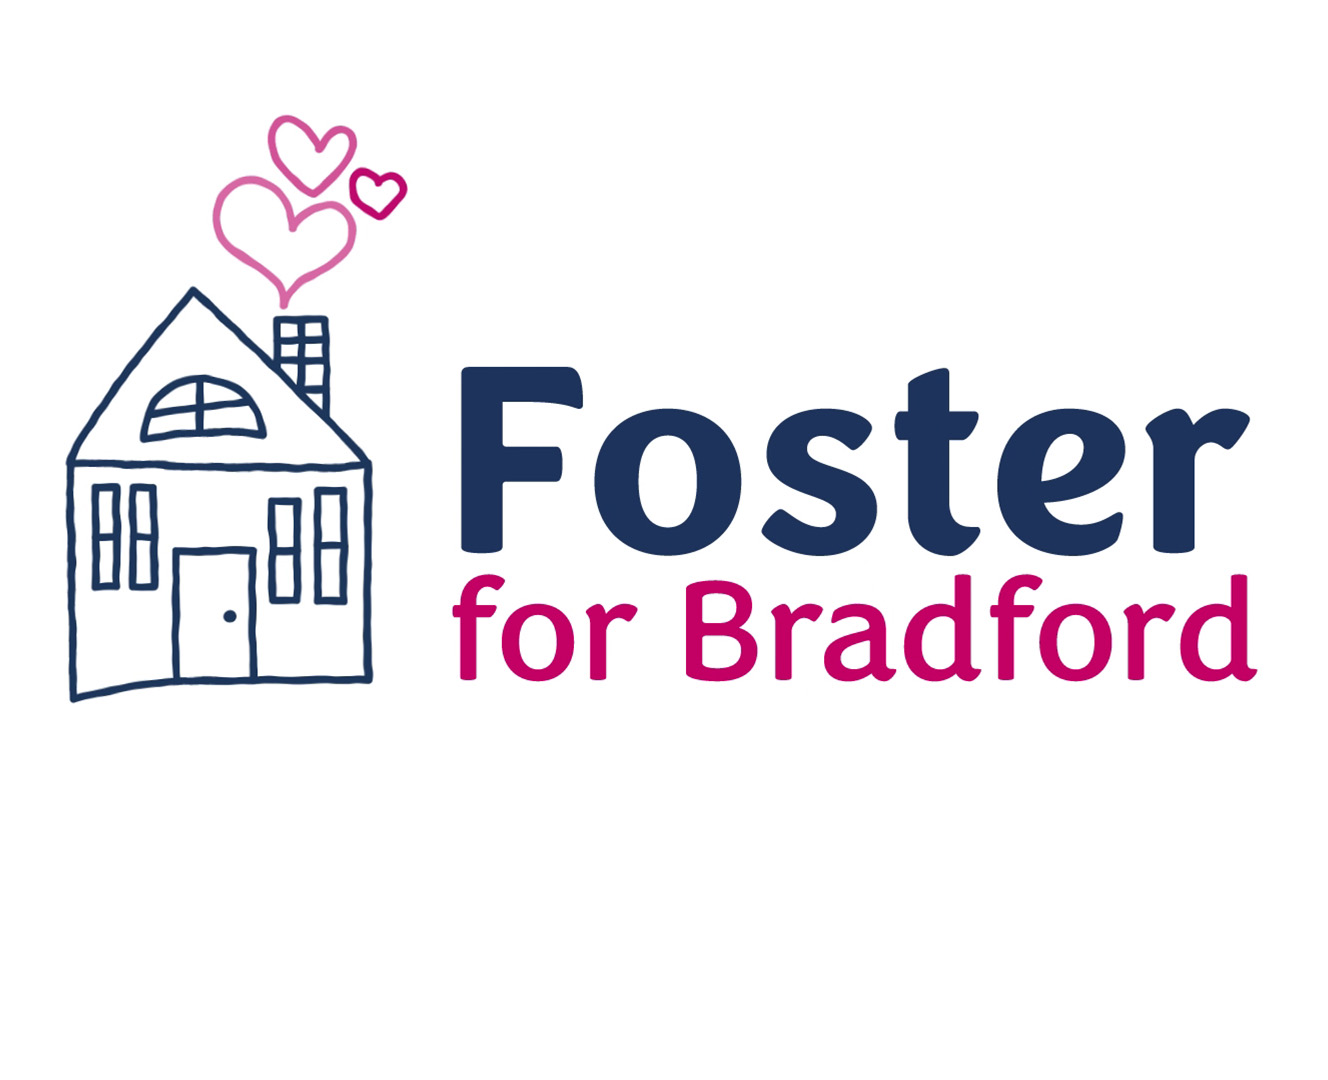 Foster for Bradford logo showing a simple house drawing with hearts rising out of the chimney